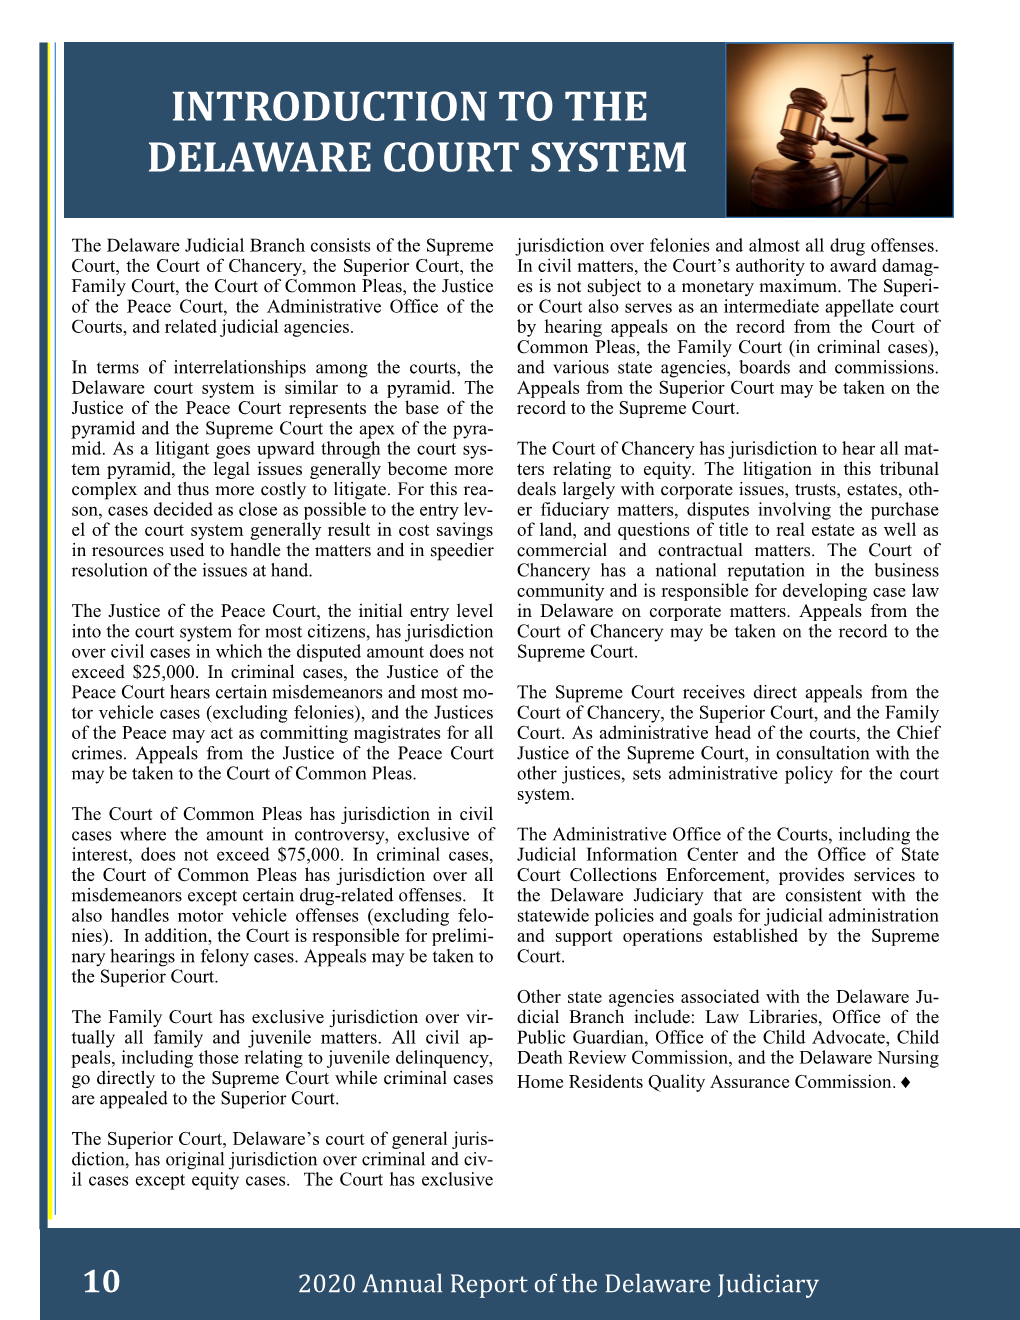 Introduction to the Delaware Court System